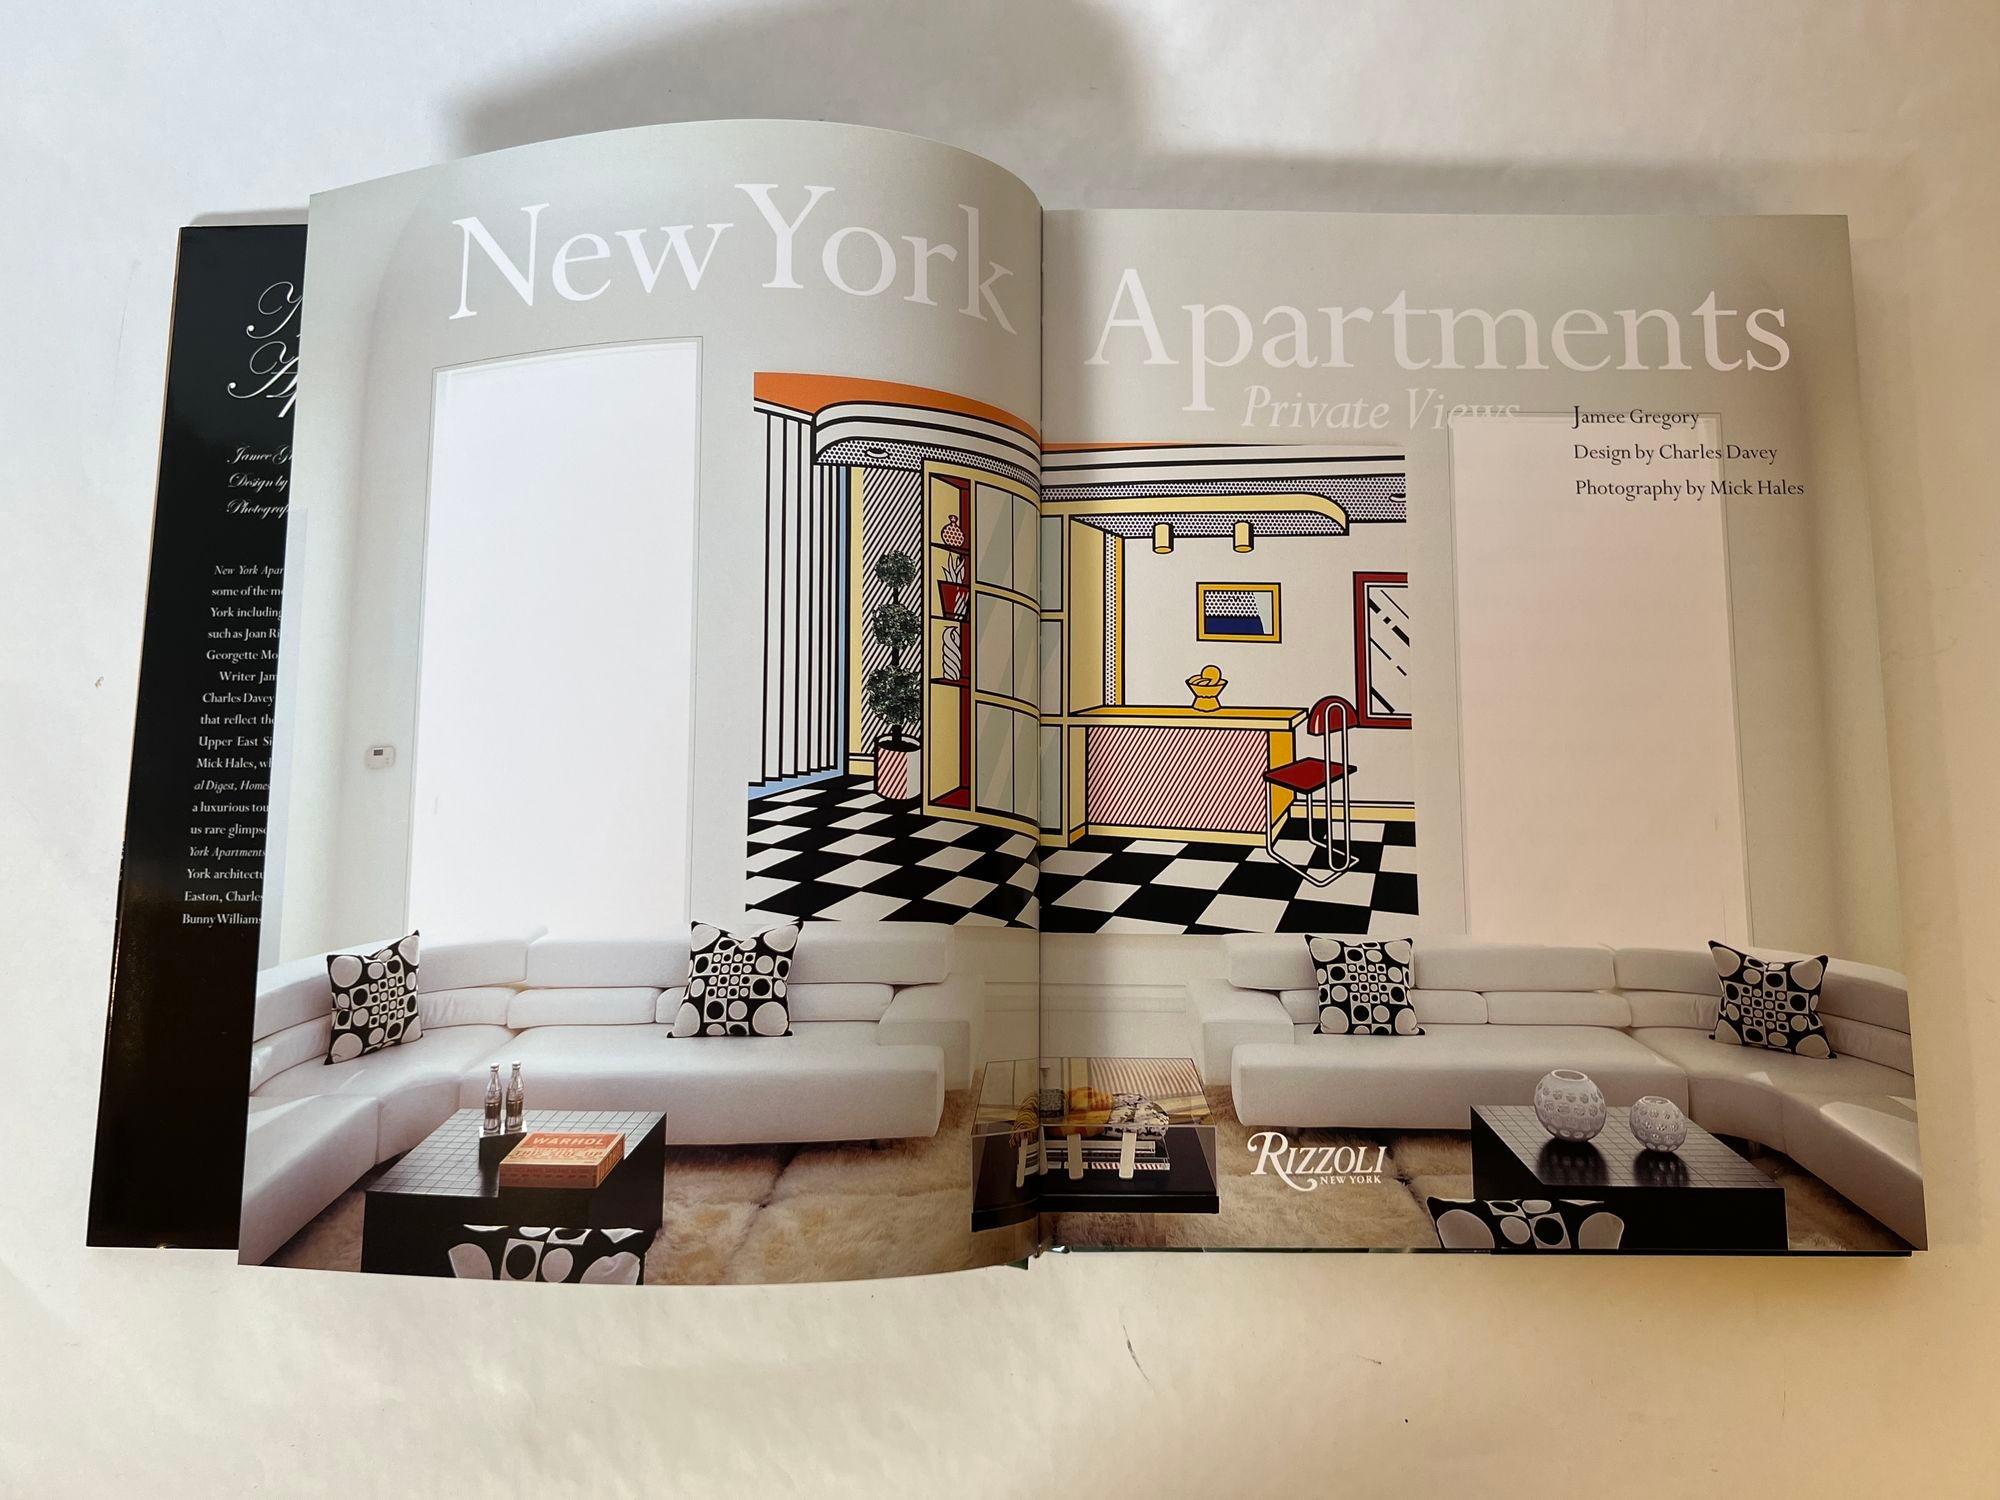 American New York Apartments: Private Views By Jamee Gregory Hardcover 2004 For Sale